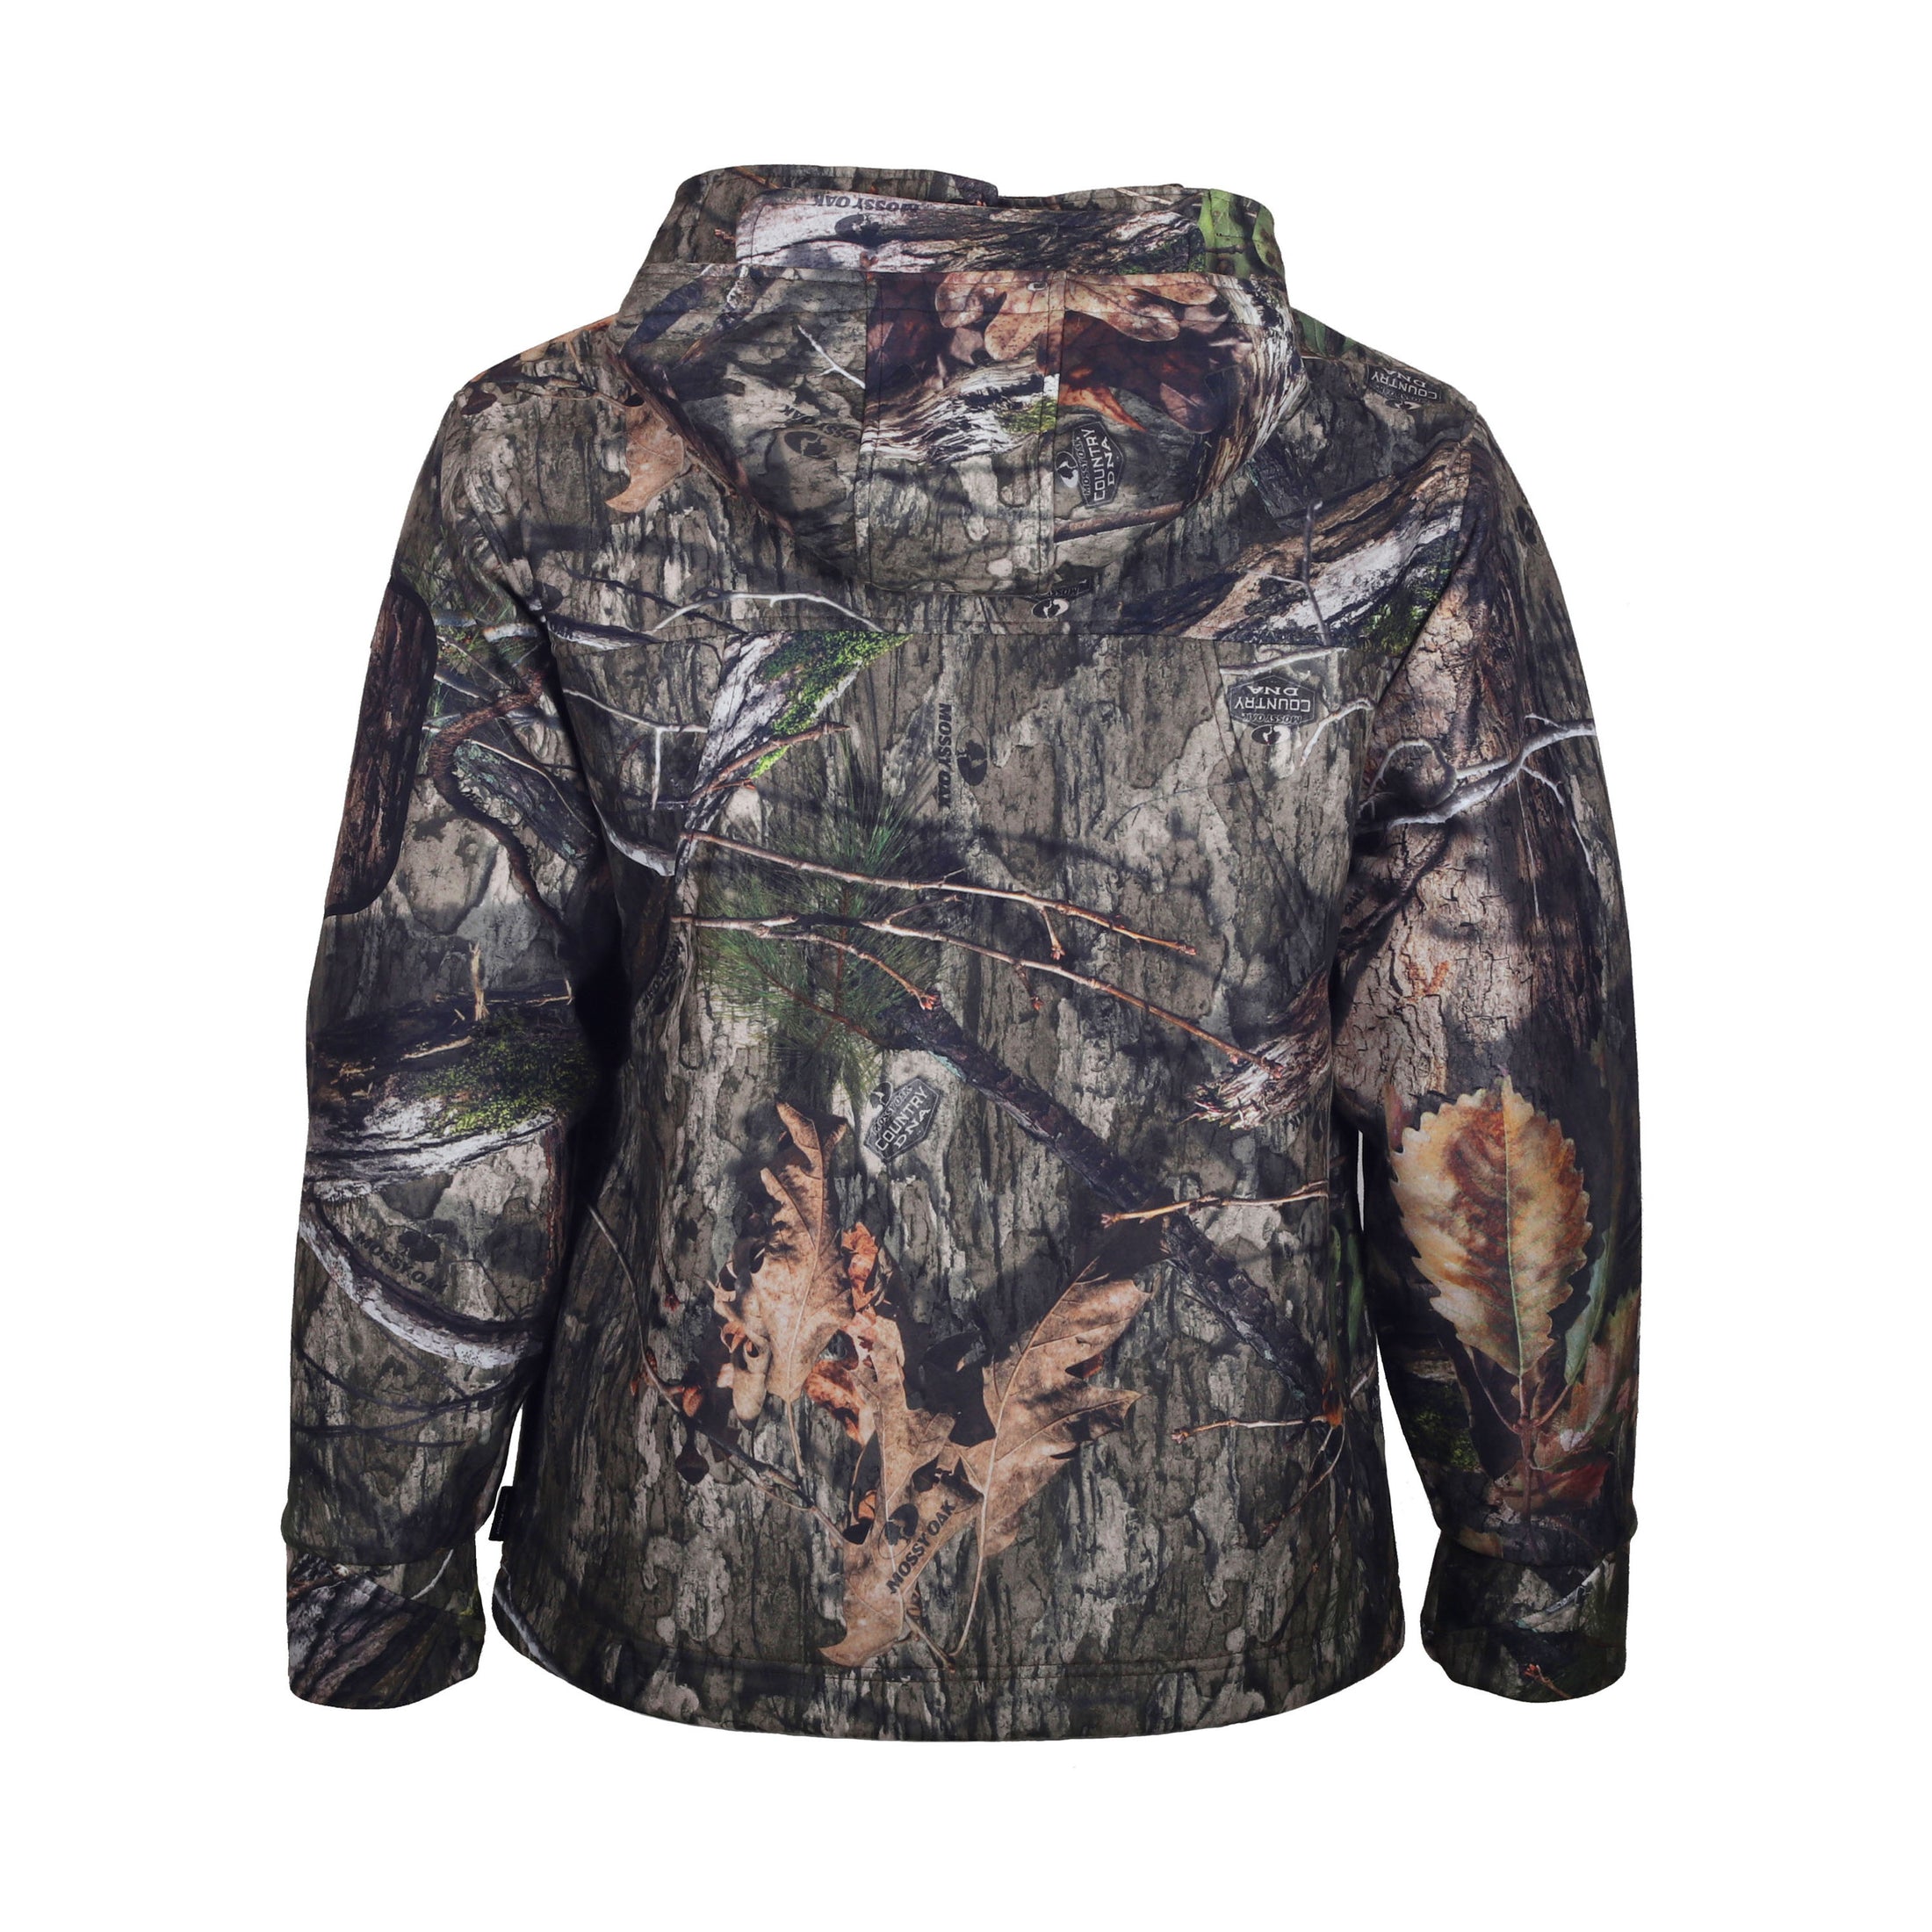 gamehide whitetail jacket back view (mossy oak dna)